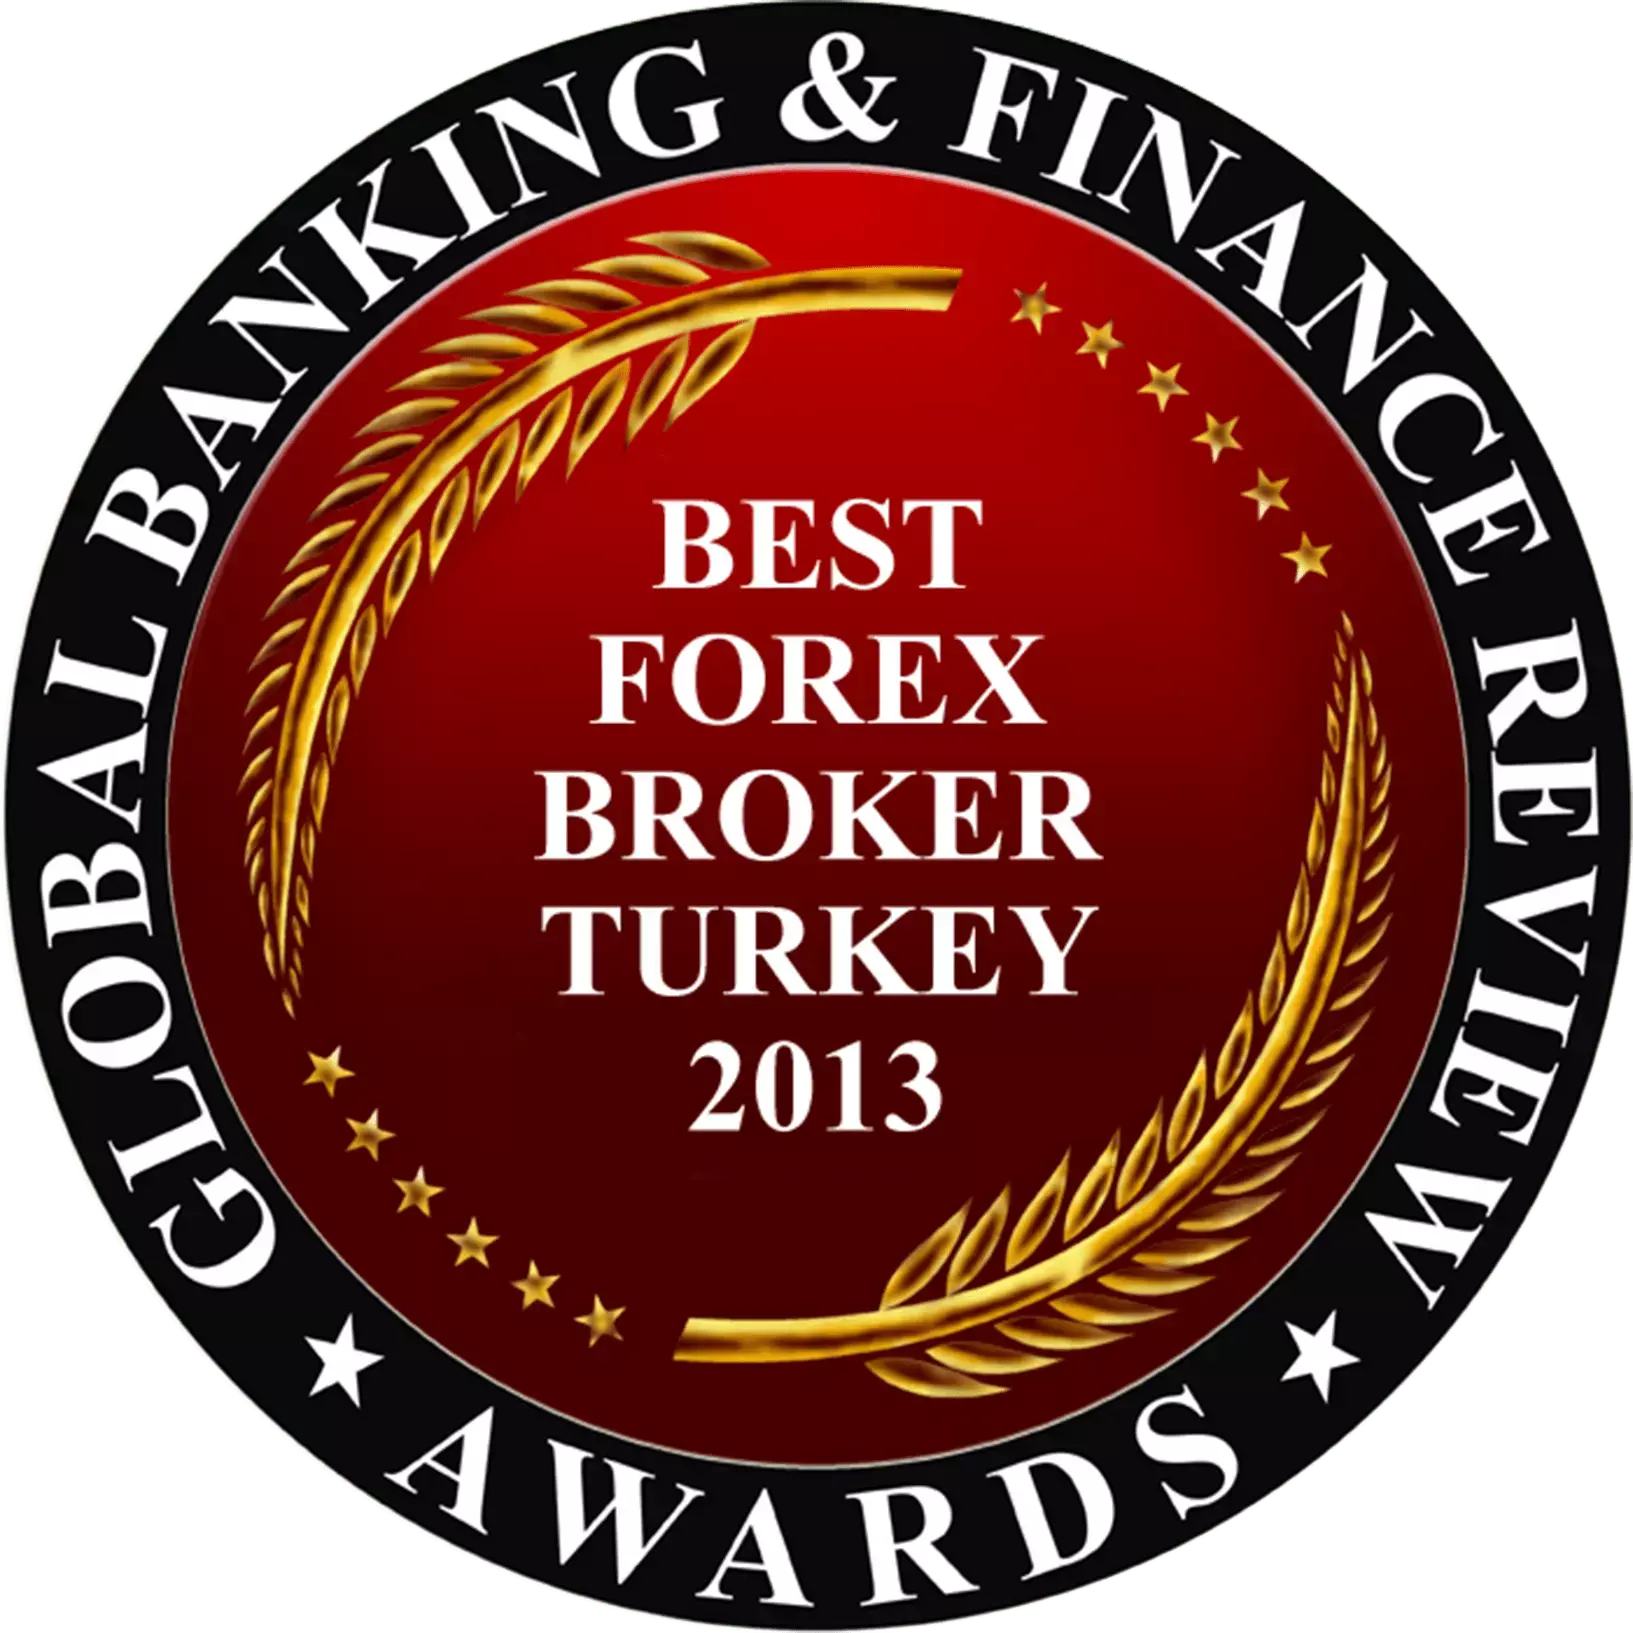 Best Forex Broker Turkey 2013 Global Banking and Finance Review Awards